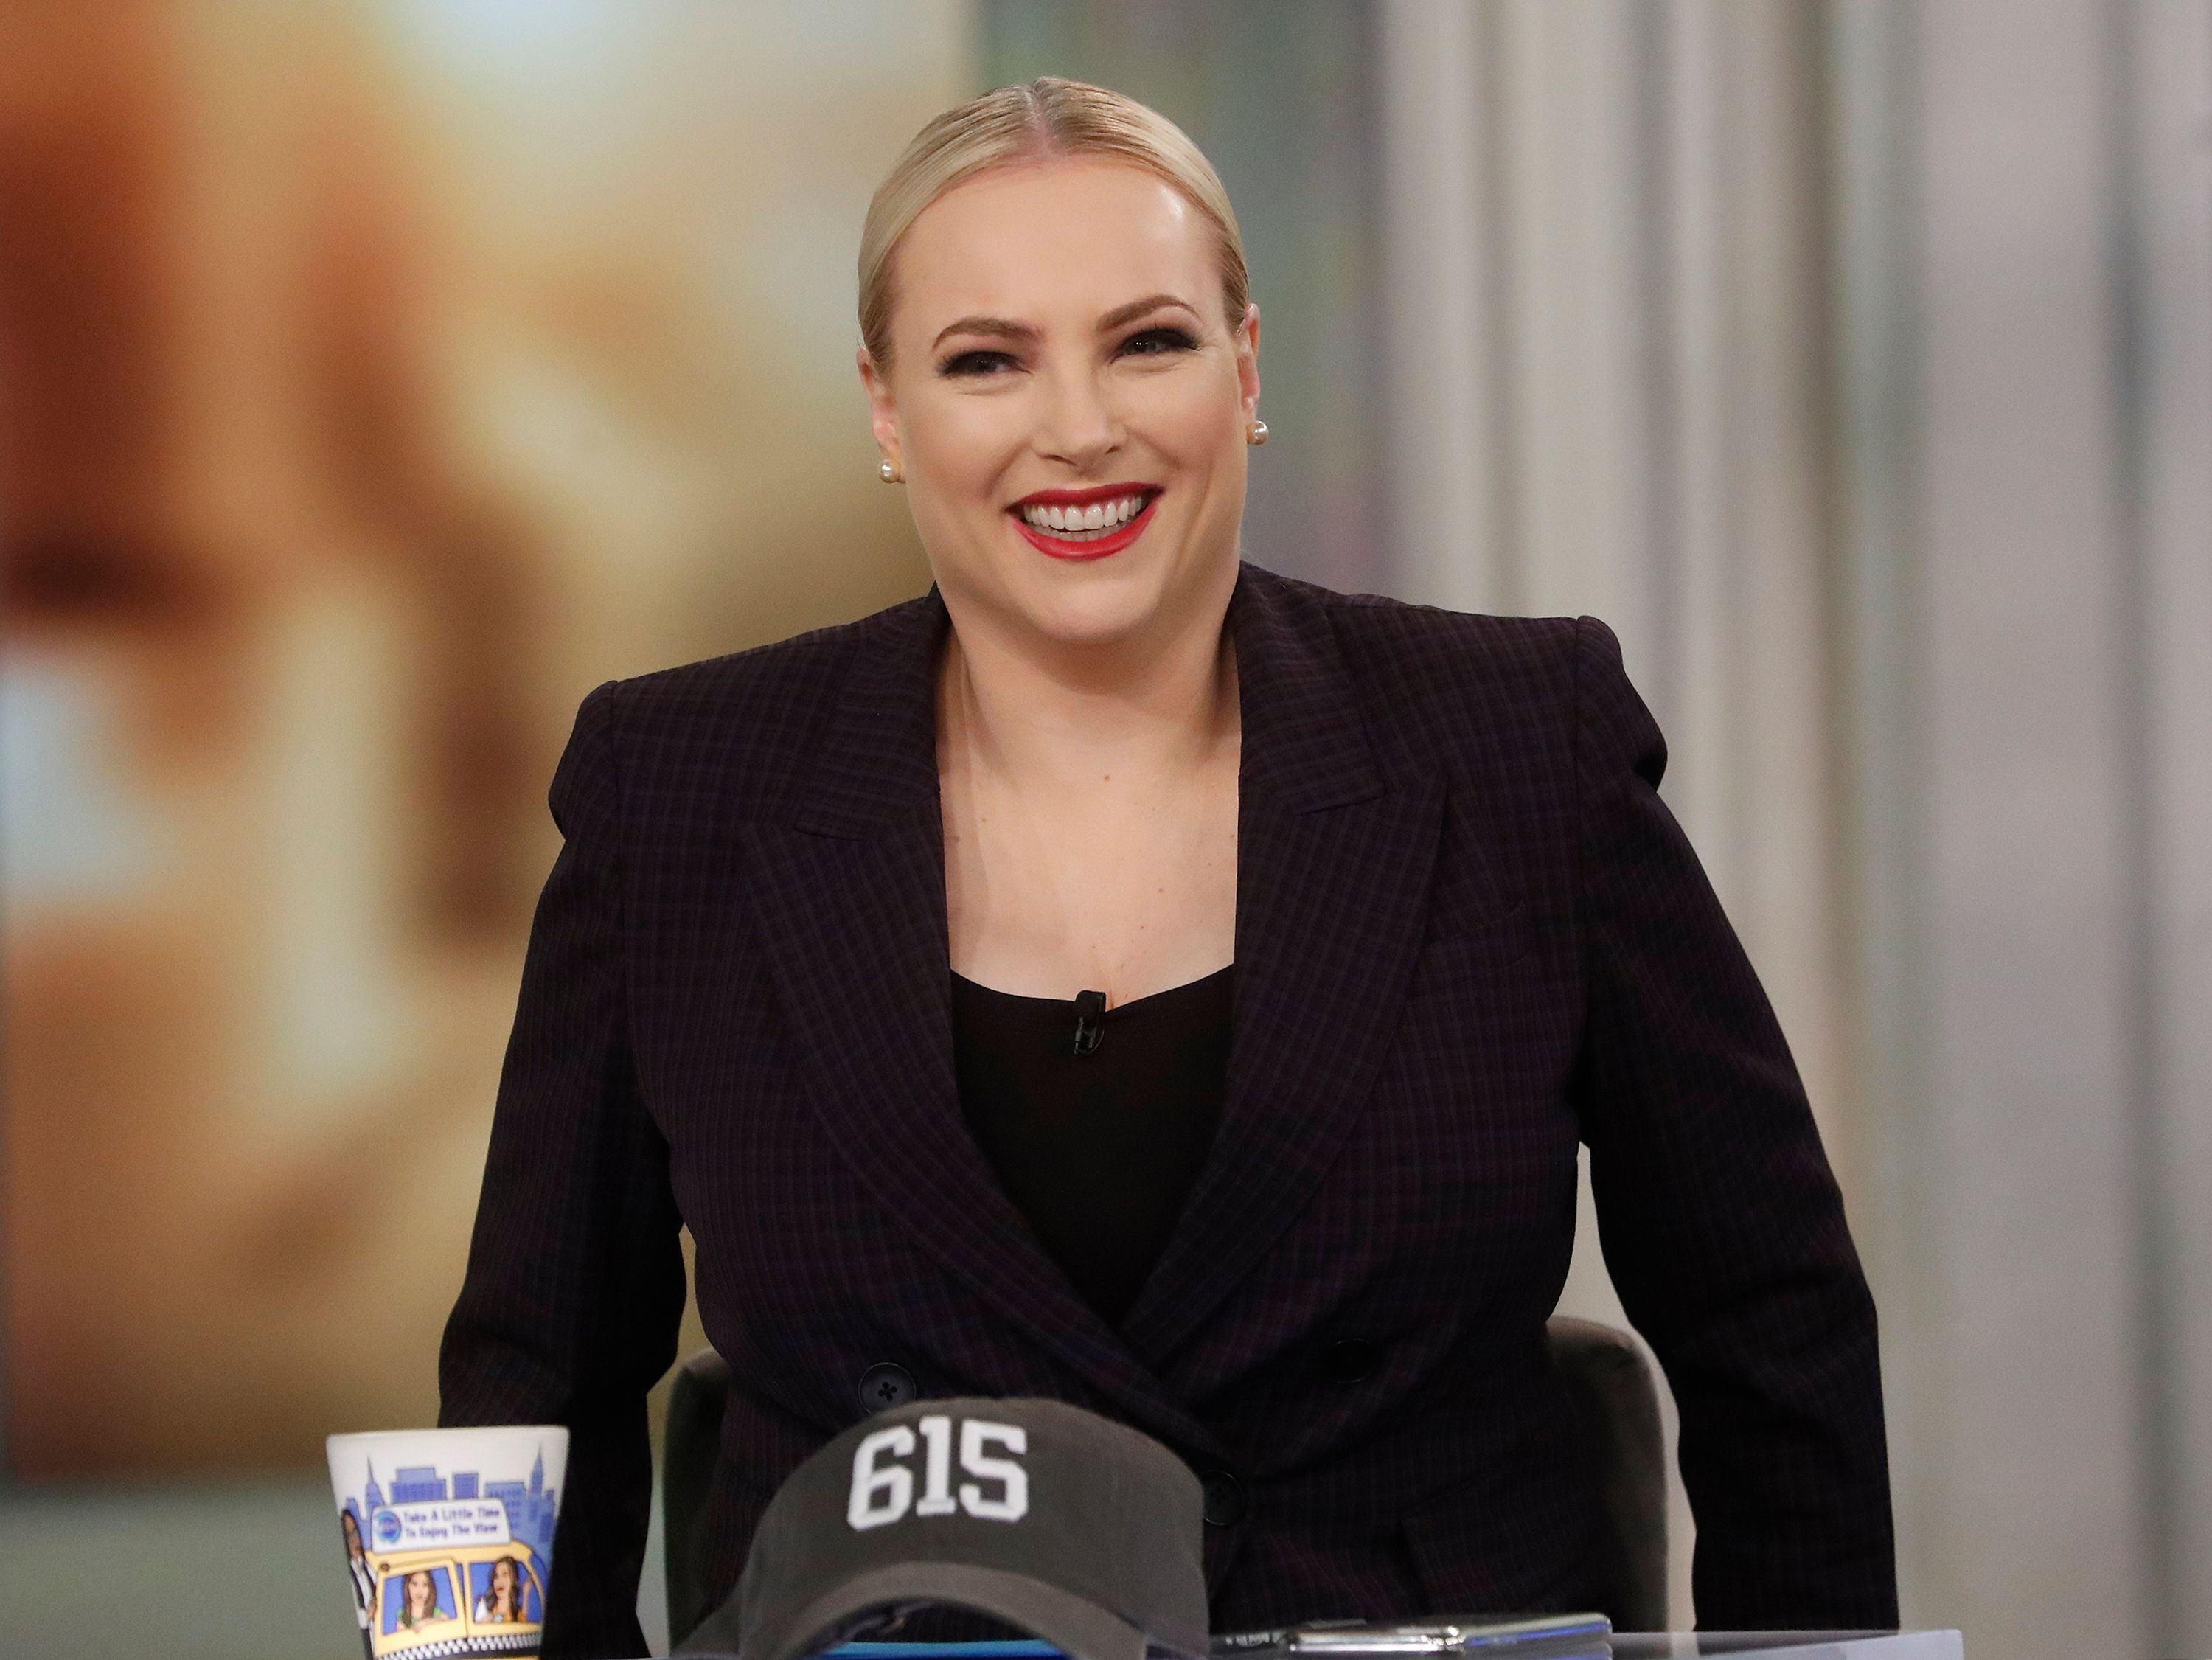 Meghan McCain during an episode of "The View" on Wednesday, March 11, 2020 | Photo: Getty Images